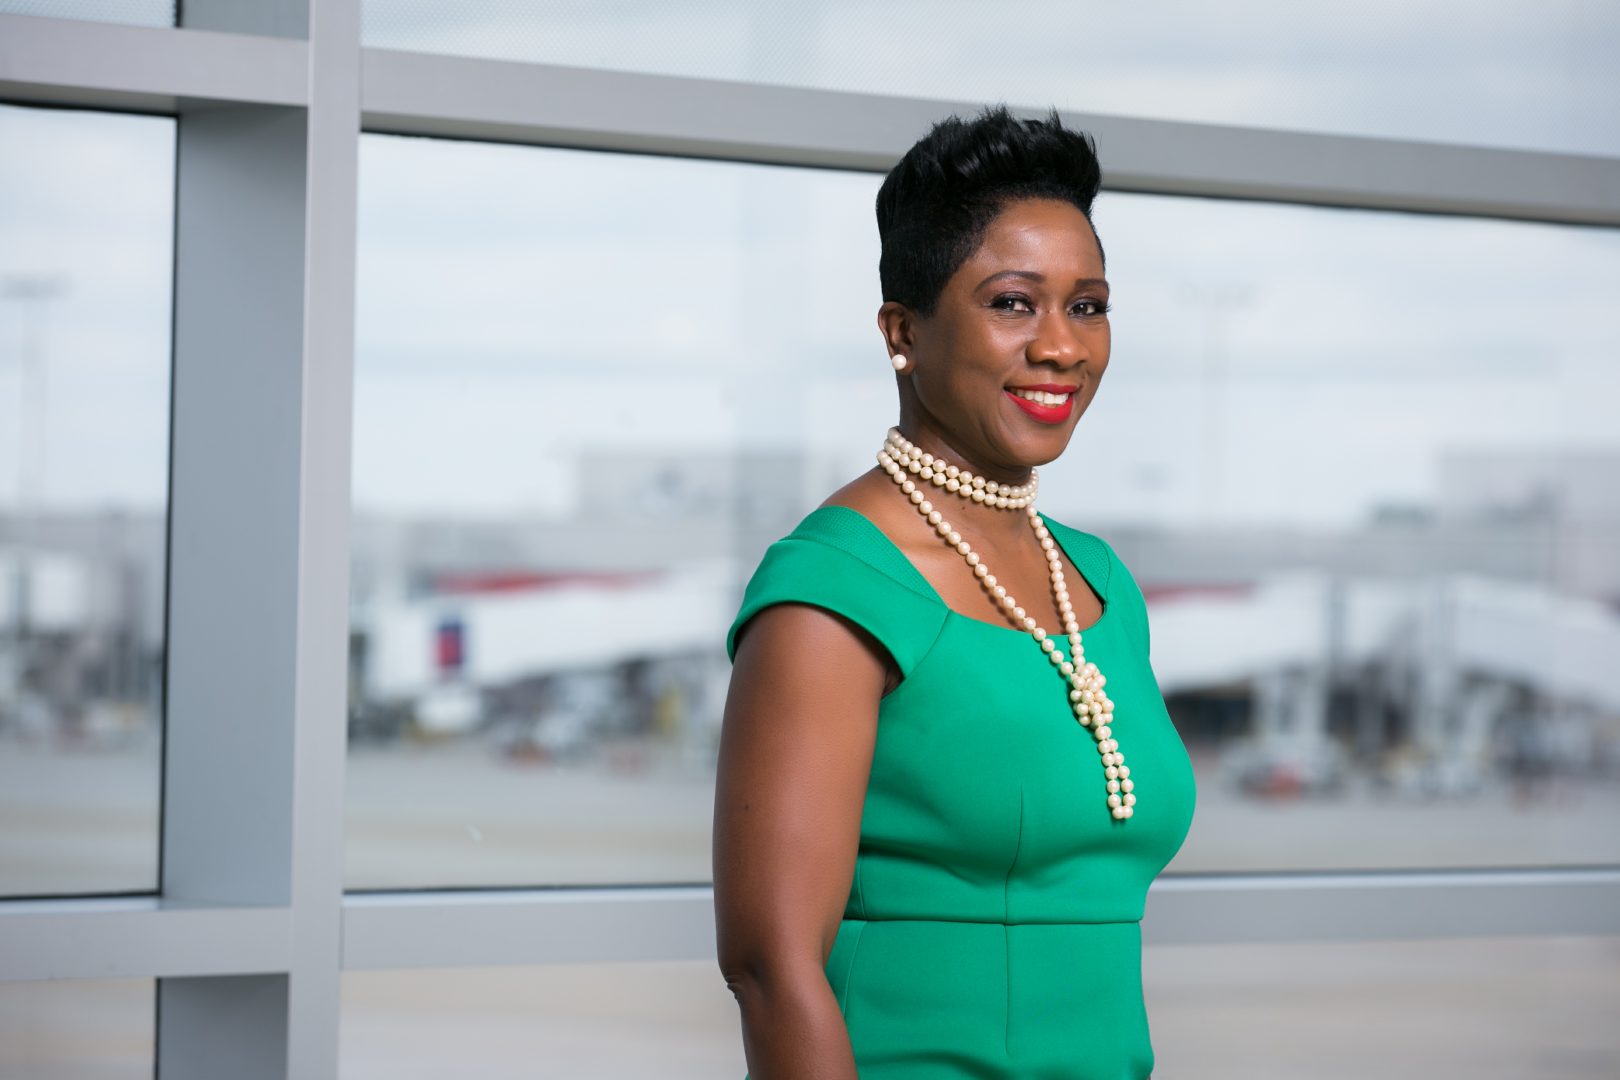 Alrene Richards Barr leads international affairs for the busiest airport